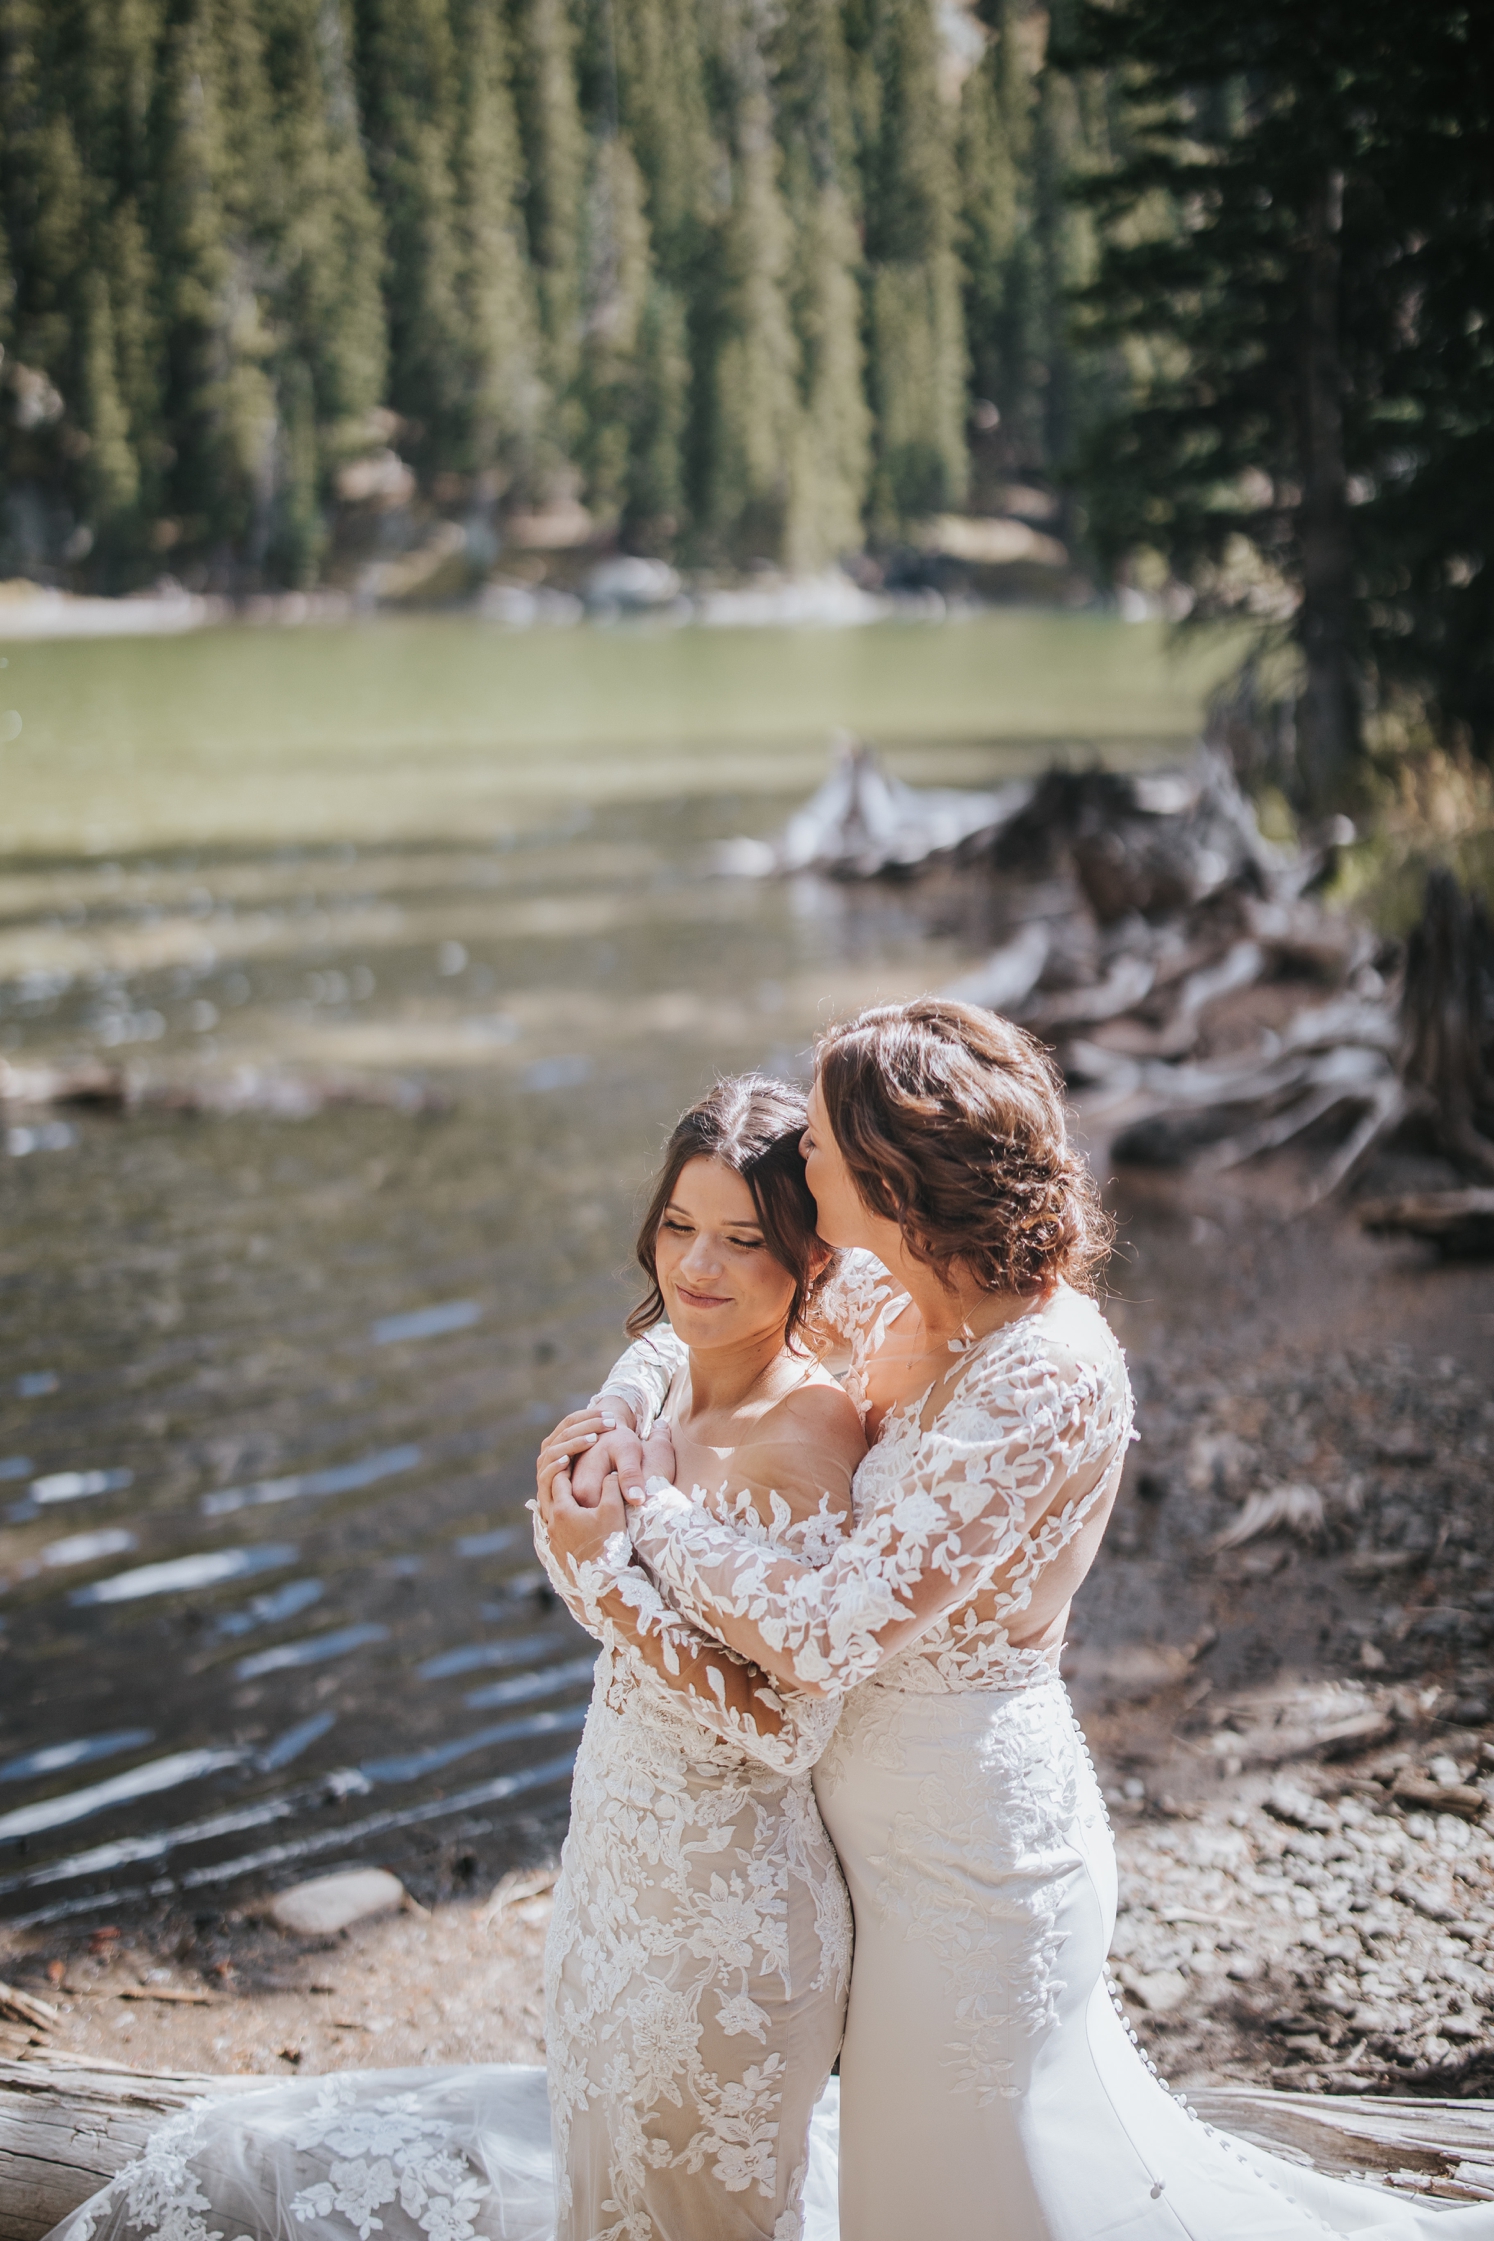 Partner kissing partner's head in front of lake at Telluride wedding | McArthur Weddings and Events